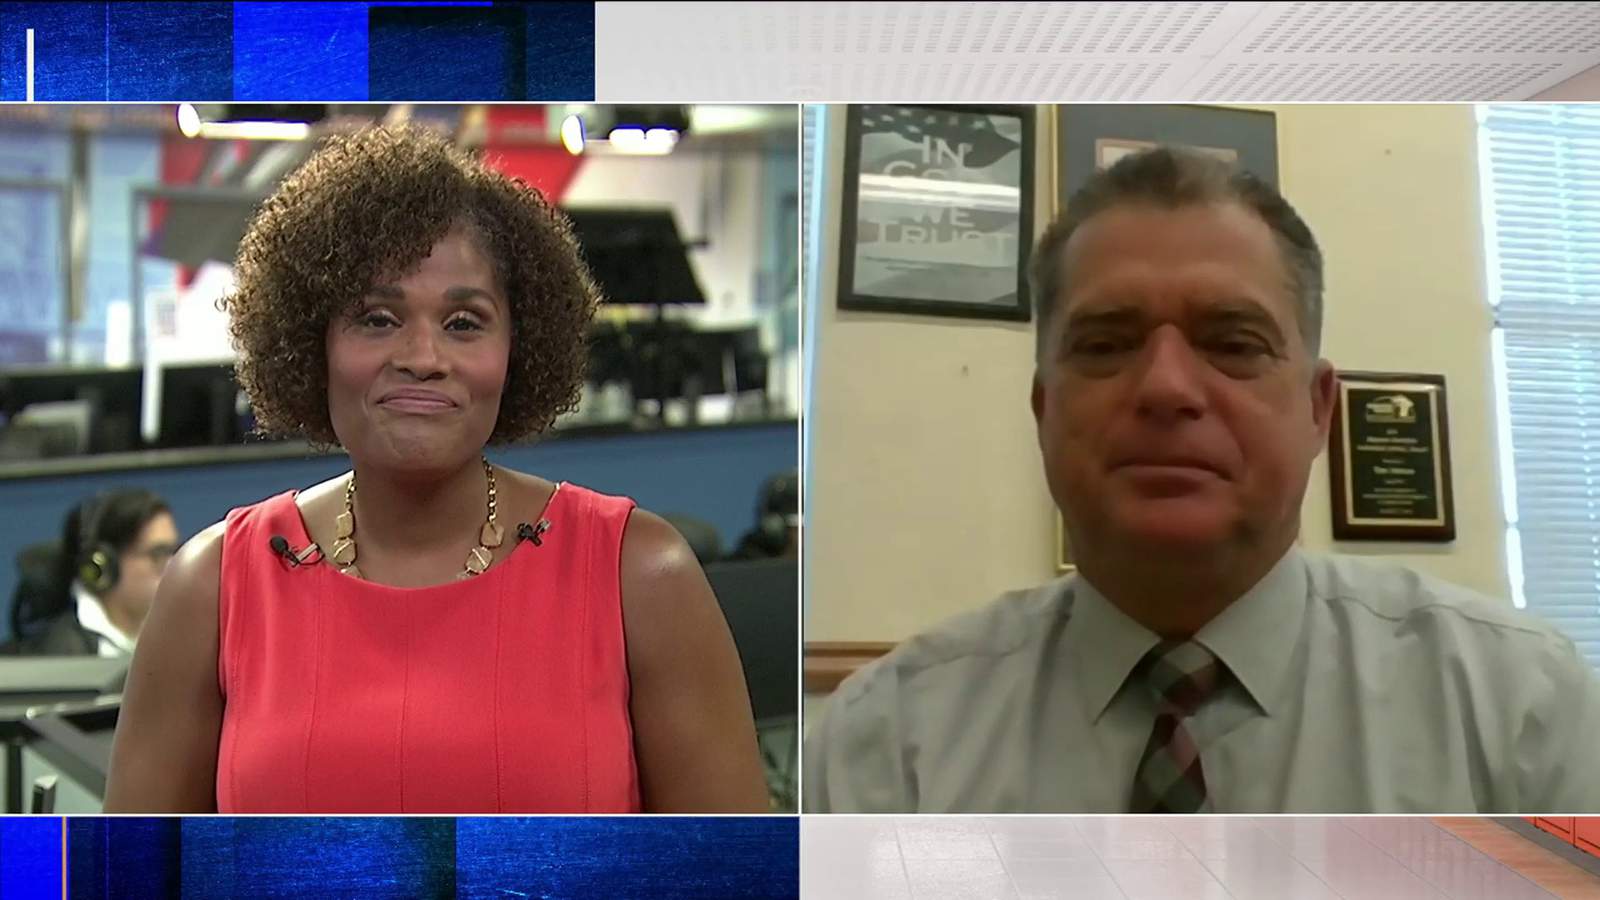 Last minute Q&A with St. Johns County superintendent before school starts